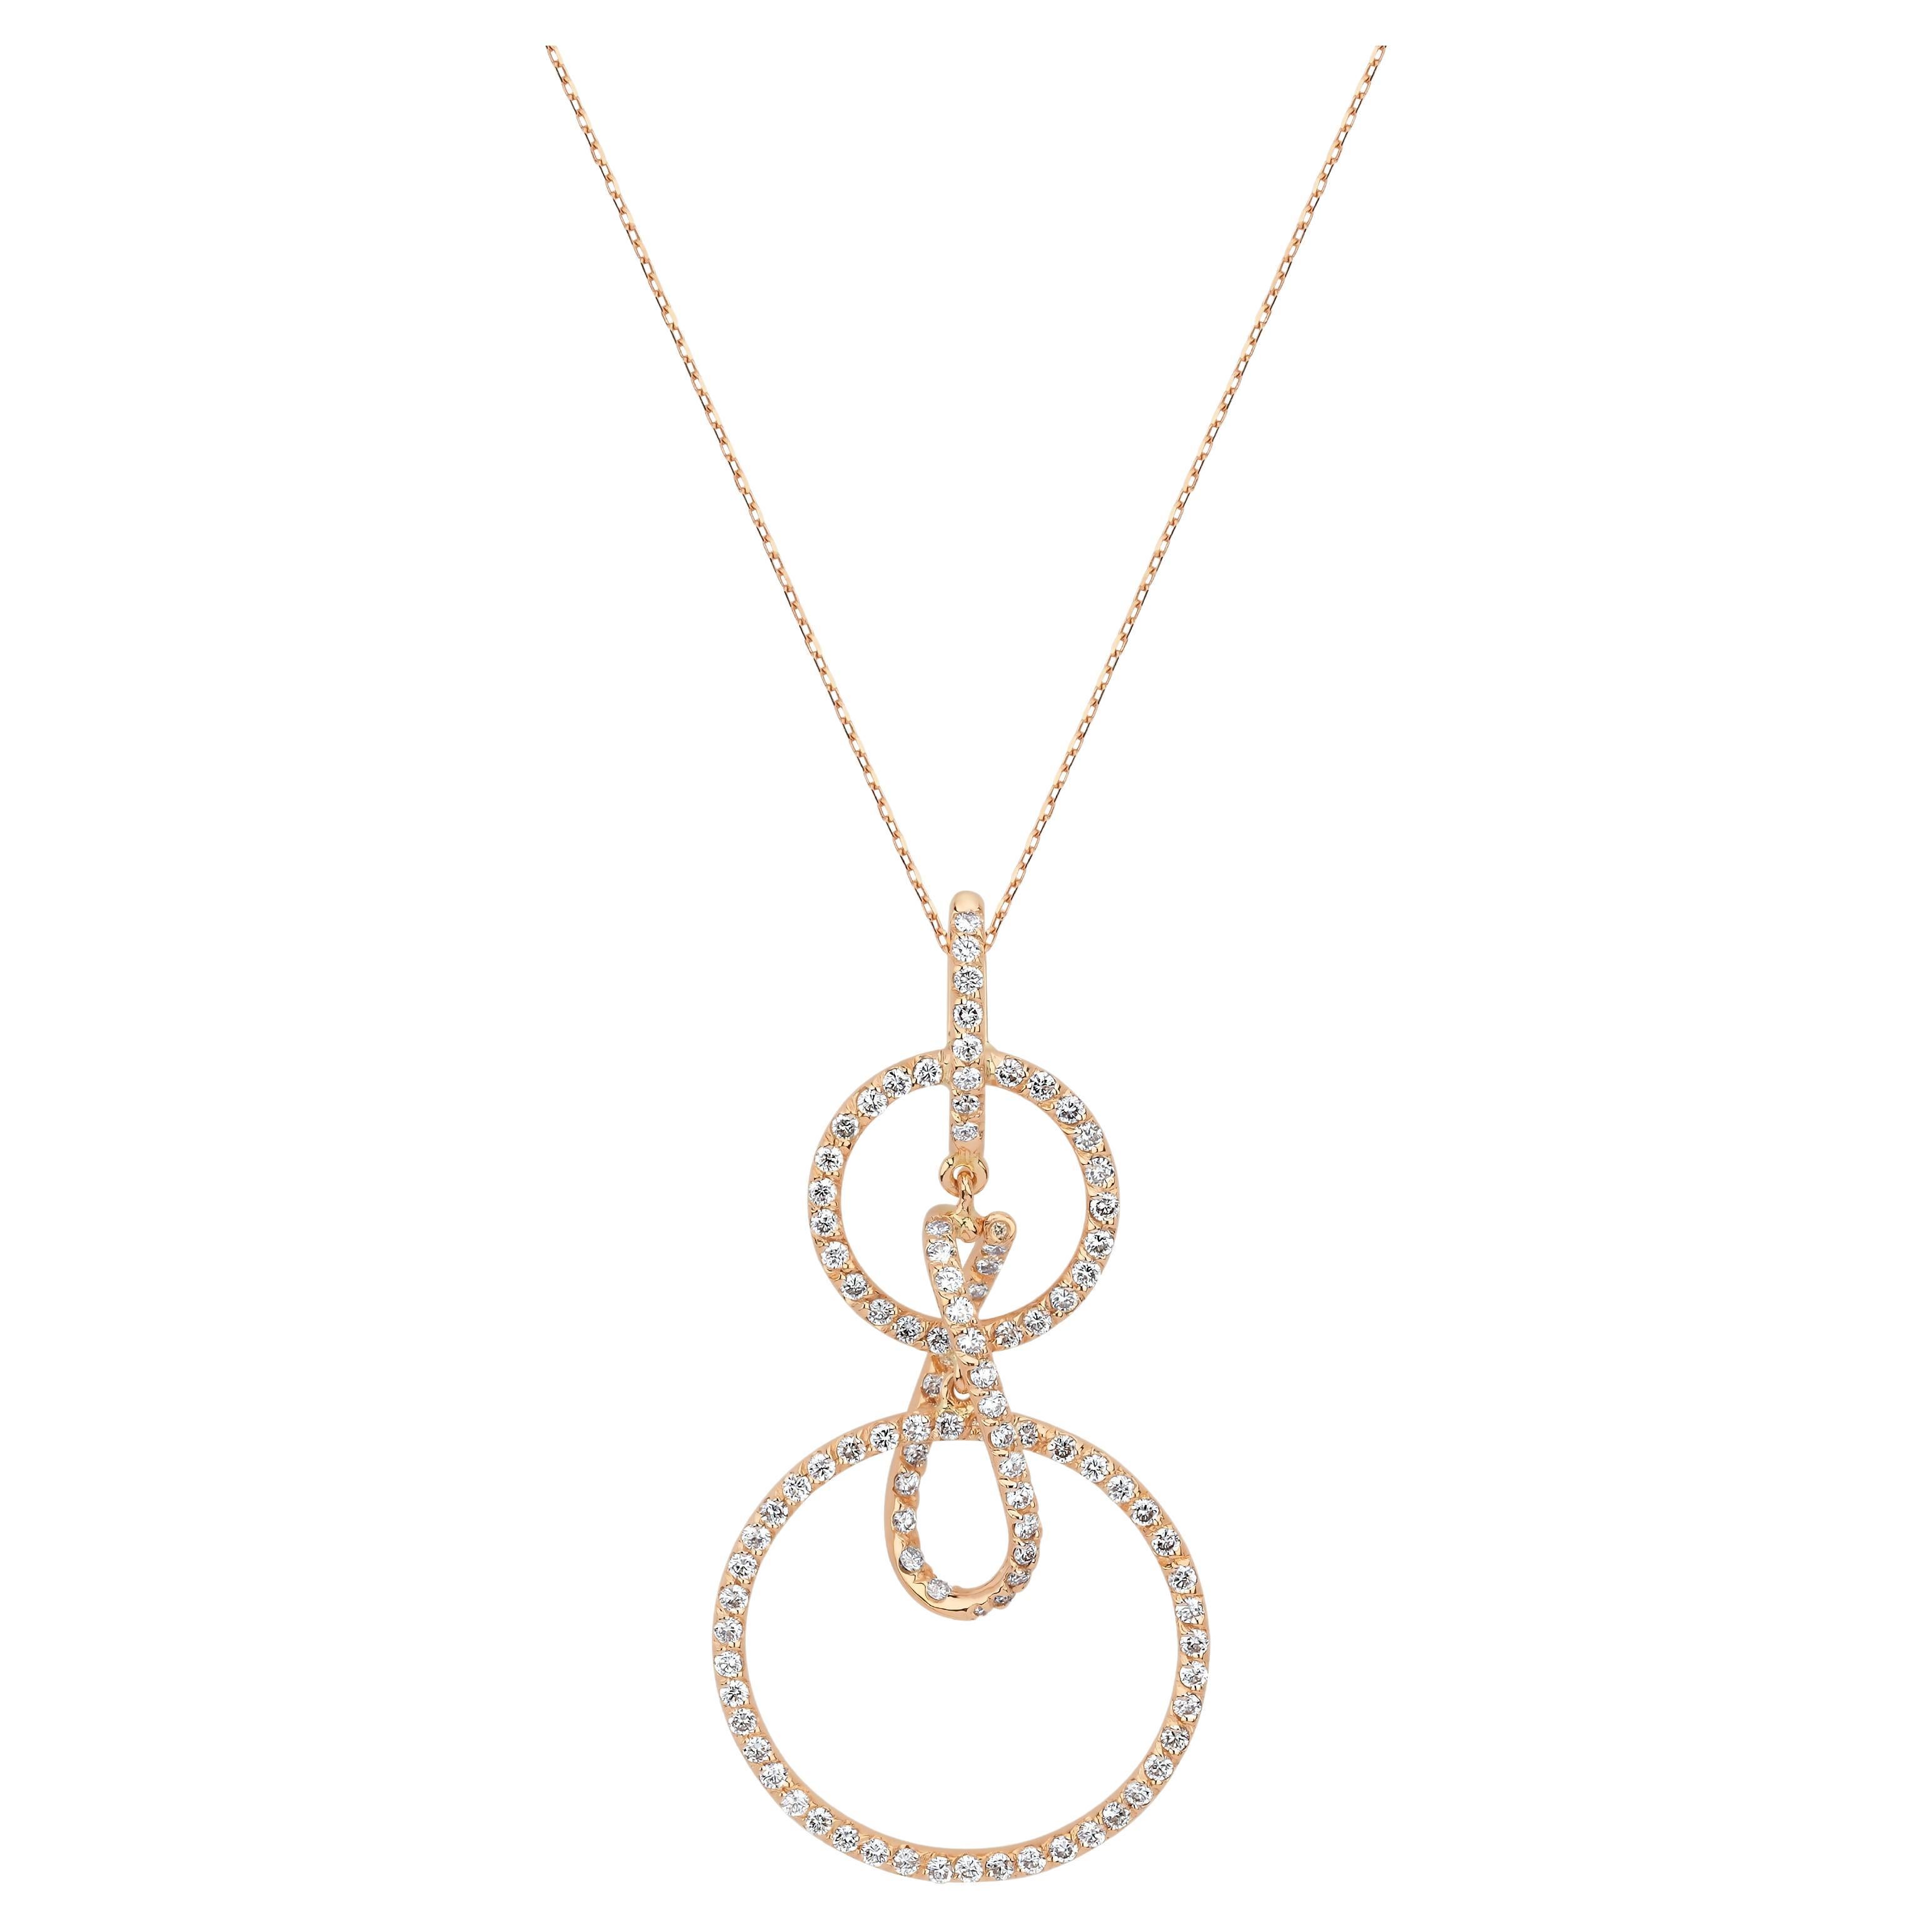 8k Gold Concentric Necklace